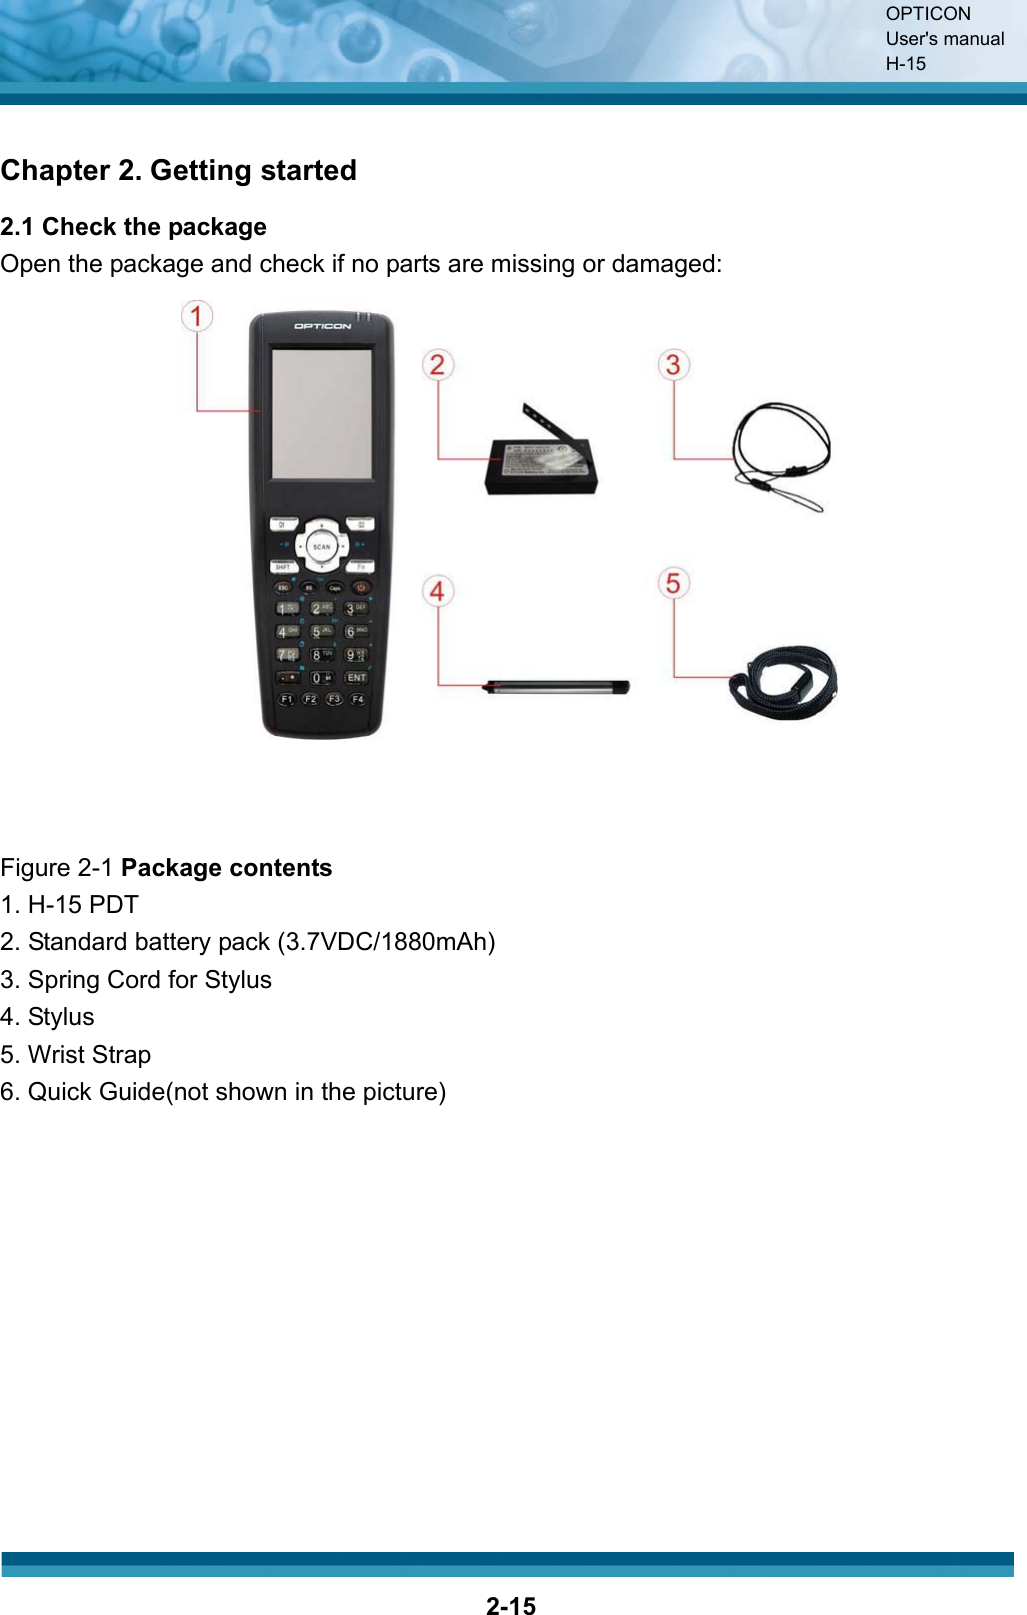 OPTICON User&apos;s manual H-152-15Chapter 2. Getting started 2.1 Check the package Open the package and check if no parts are missing or damaged: Figure 2-1 Package contents1. H-15 PDT2. Standard battery pack (3.7VDC/1880mAh) 3. Spring Cord for Stylus 4. Stylus 5. Wrist Strap 6. Quick Guide(not shown in the picture) 